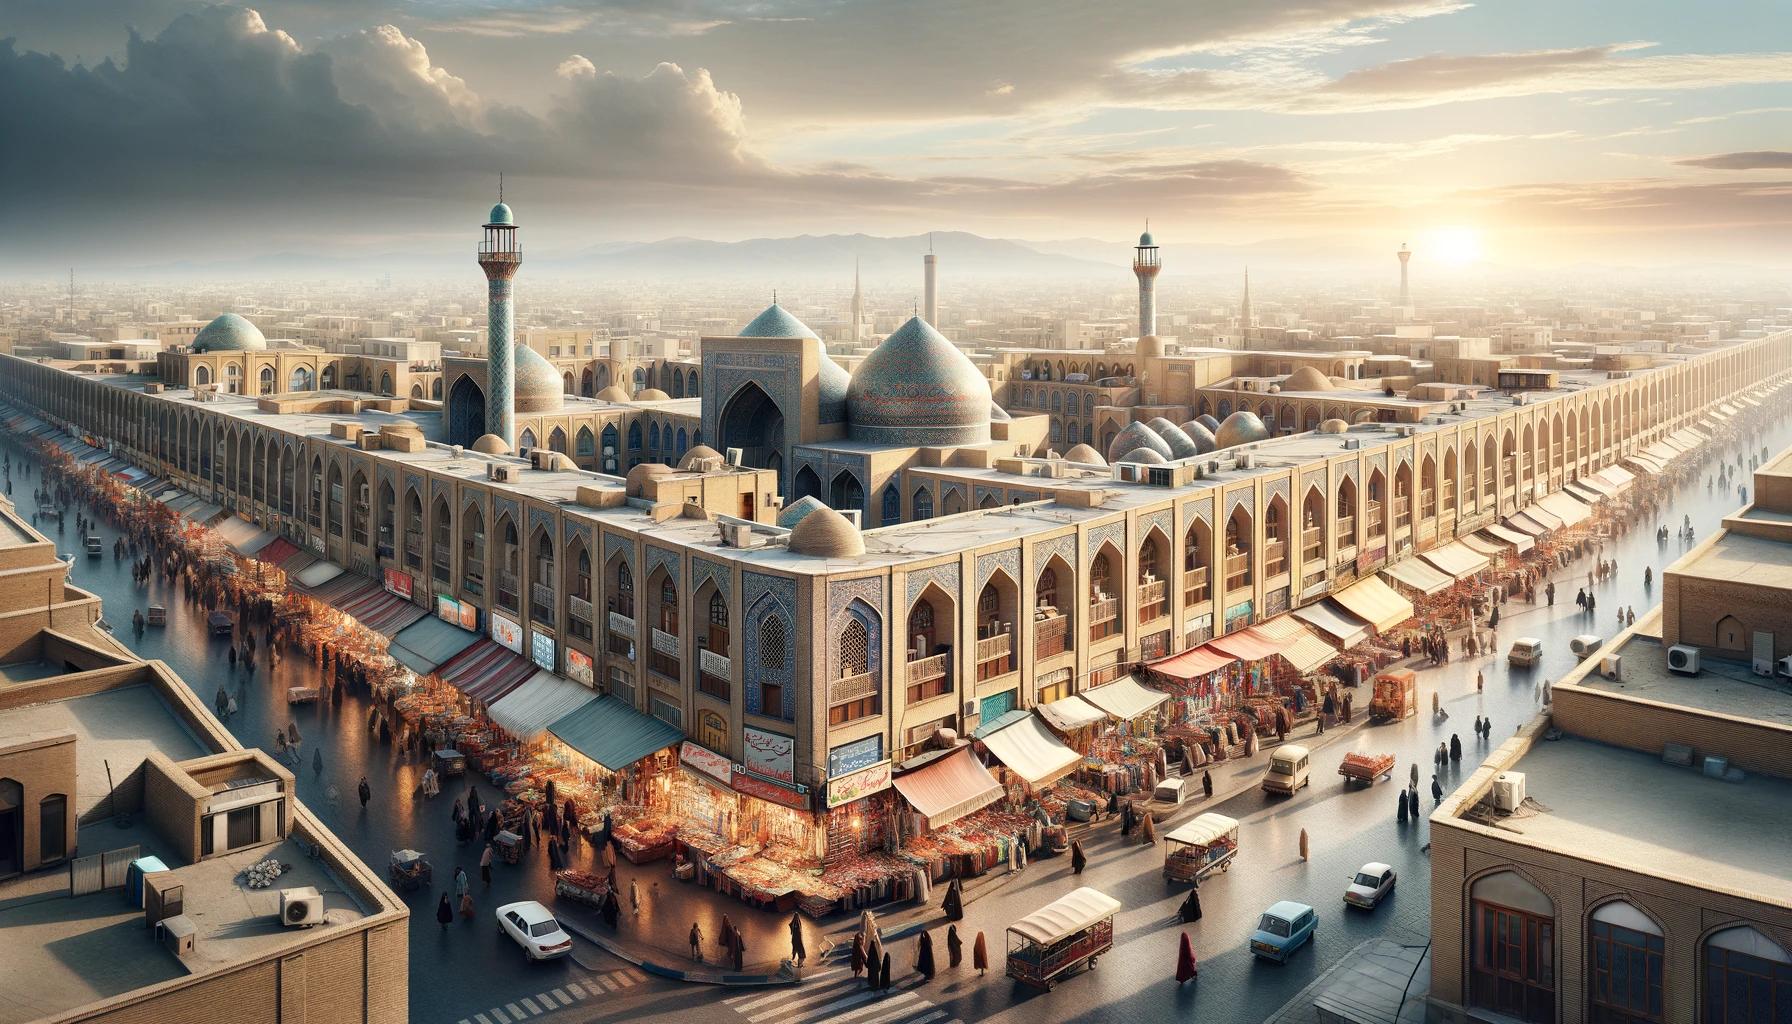 DALL·E 2024-03-12 14.50.57 - A photorealistic image depicting the famous Tabriz Bazaar, a UNESCO World Heritage site, in Tabriz, Iran. The bazaar should be bustling with activity,